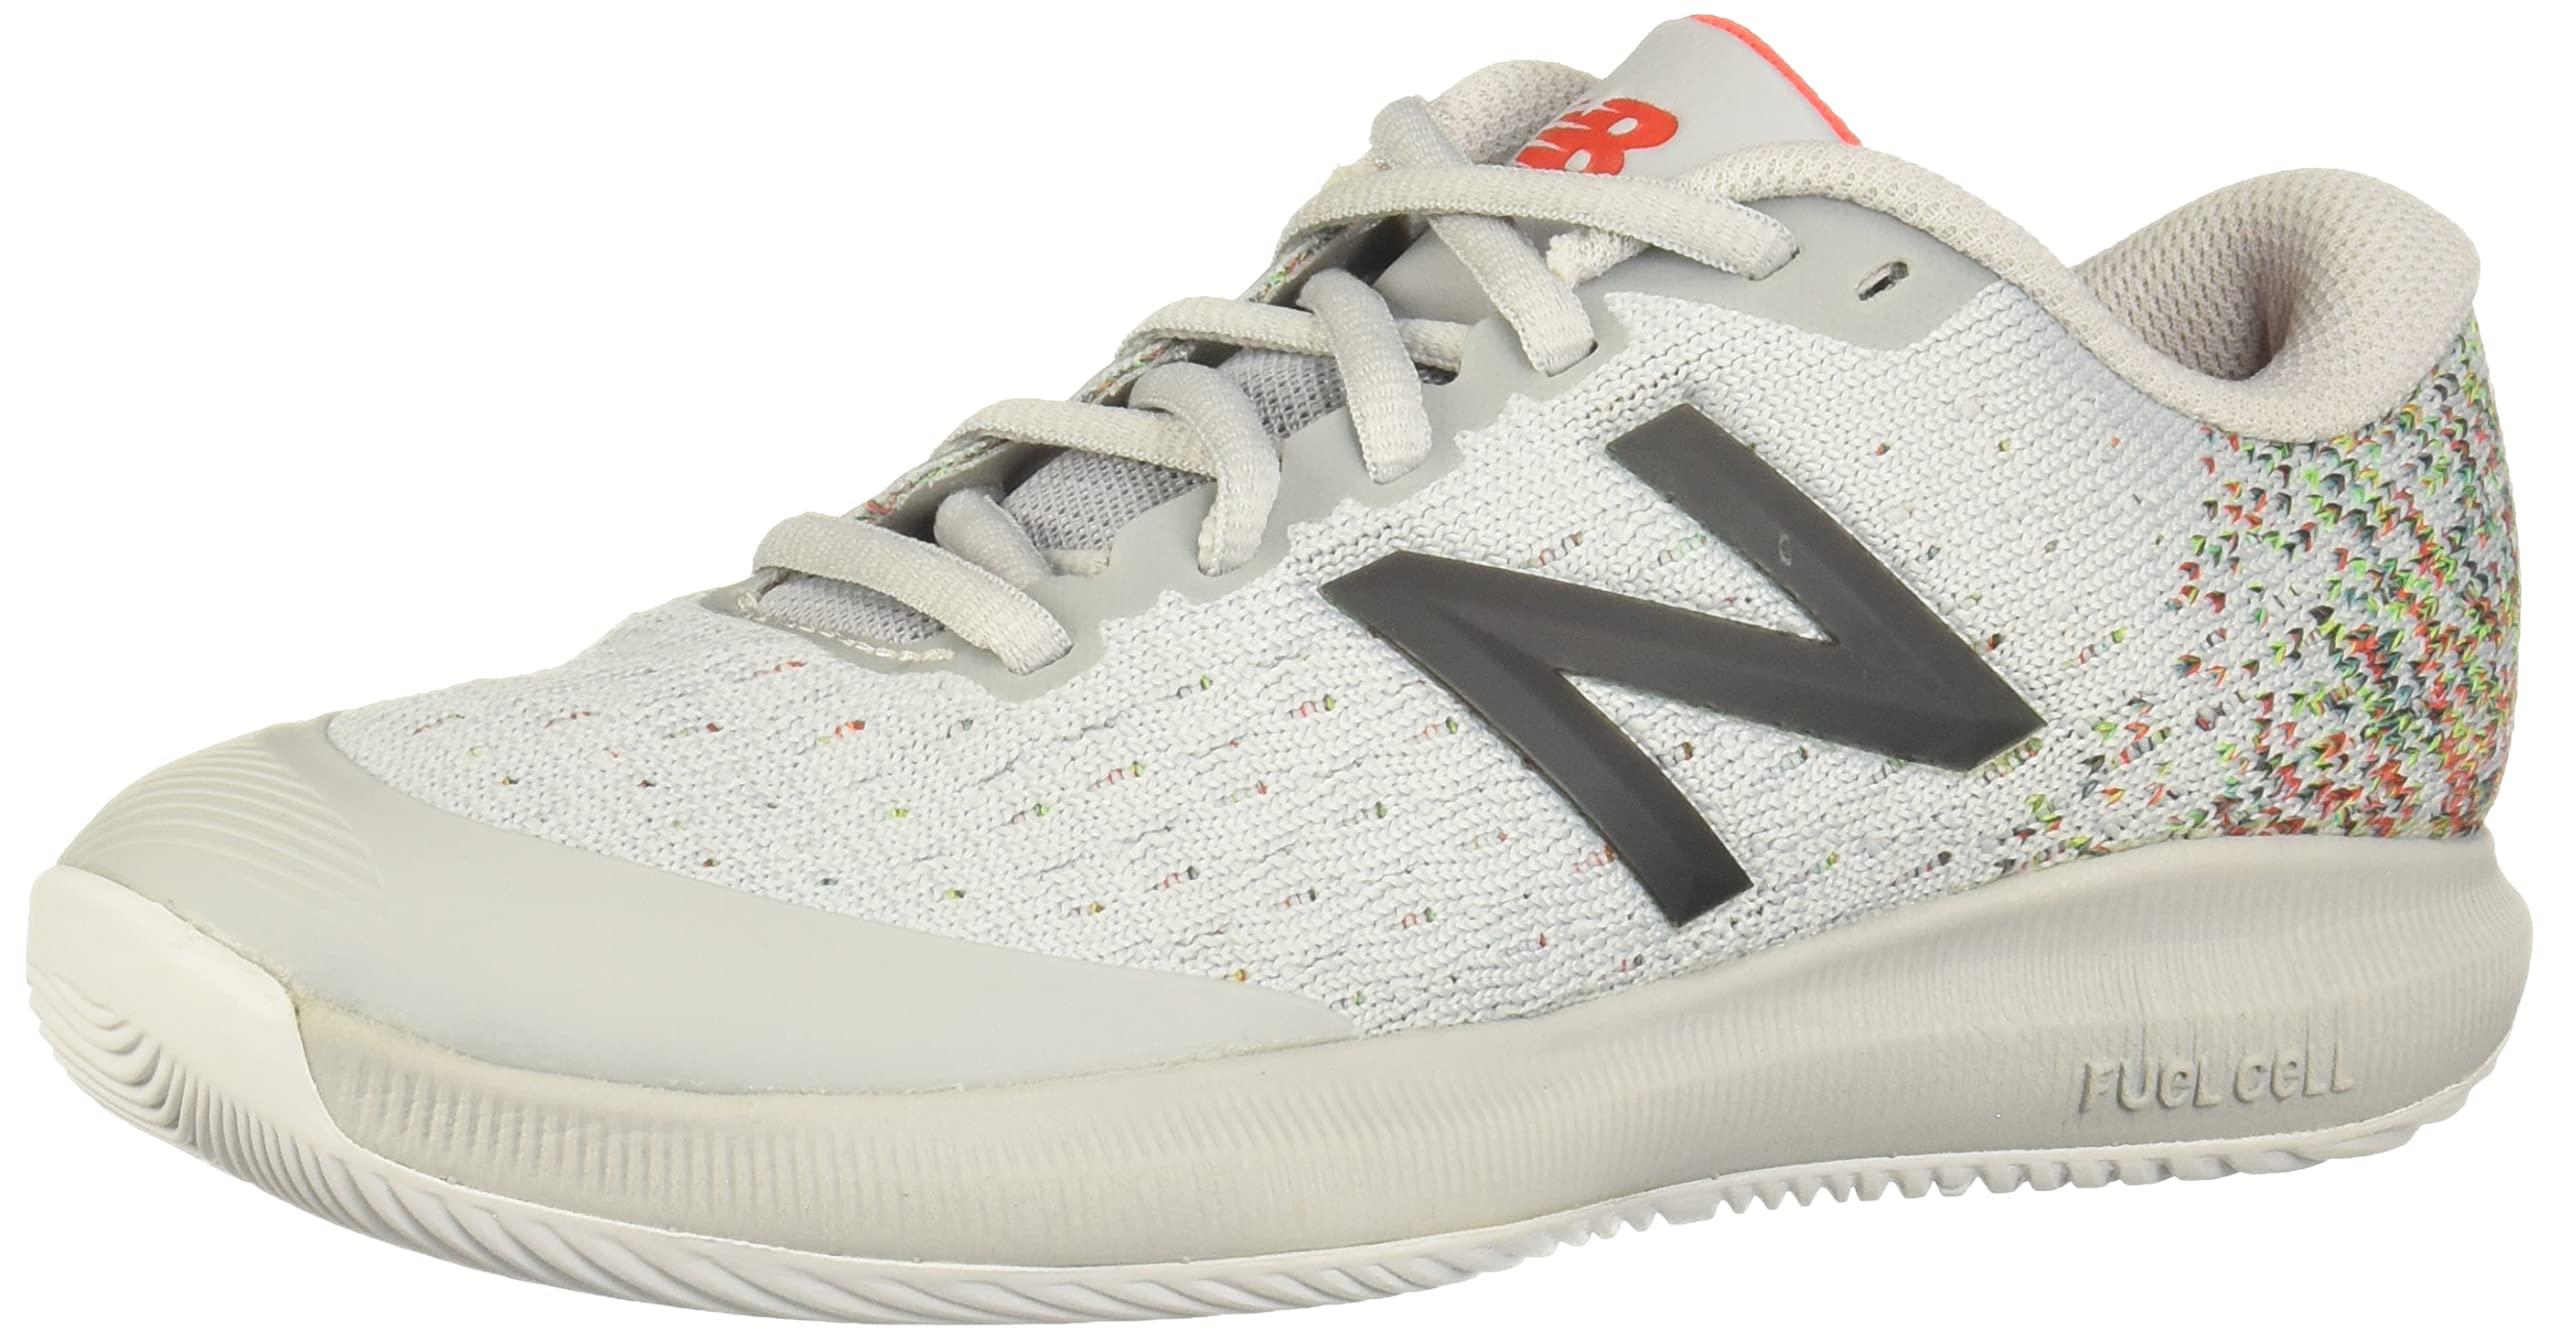 New Balance Fuelcell 996 V4 Hard Court Tennis Shoe in Gray | Lyst